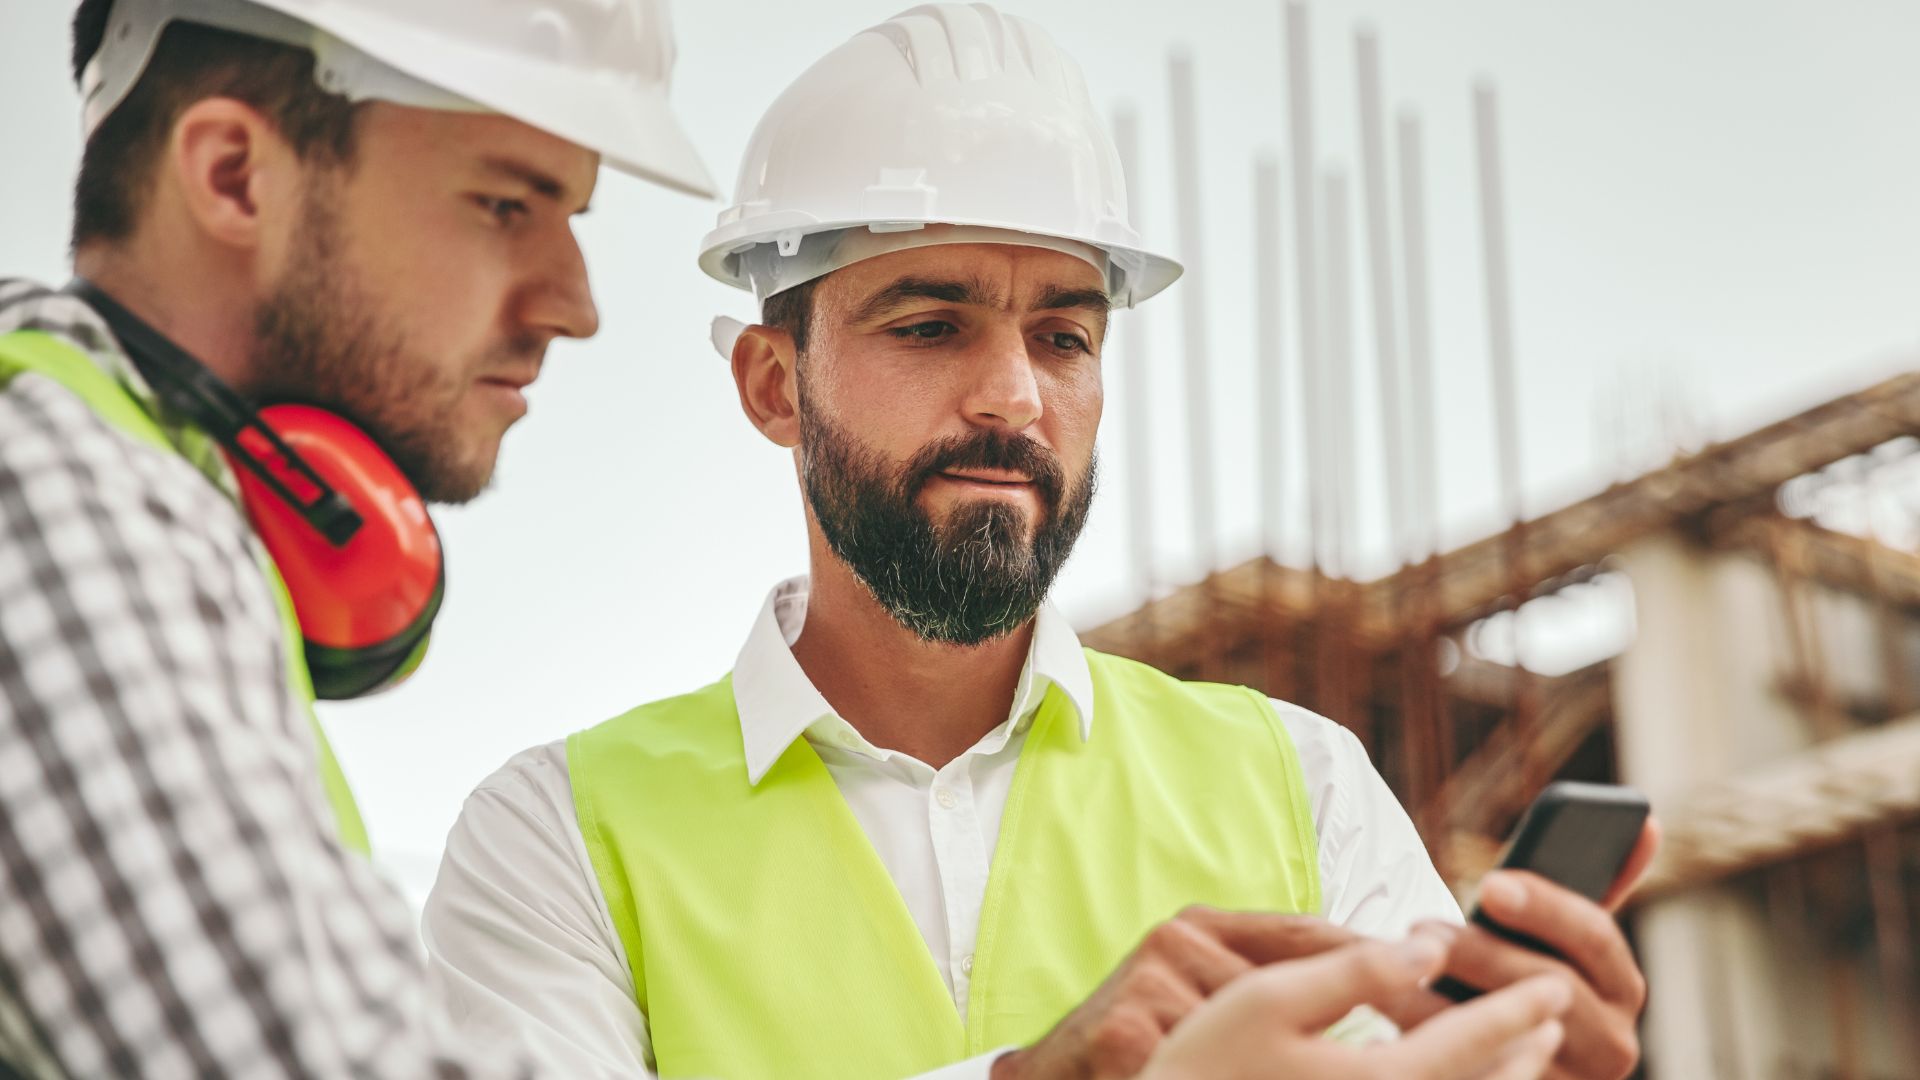 Invoicing Efficiency Redefined: Construction Management Apps for Subcontractors in Australia